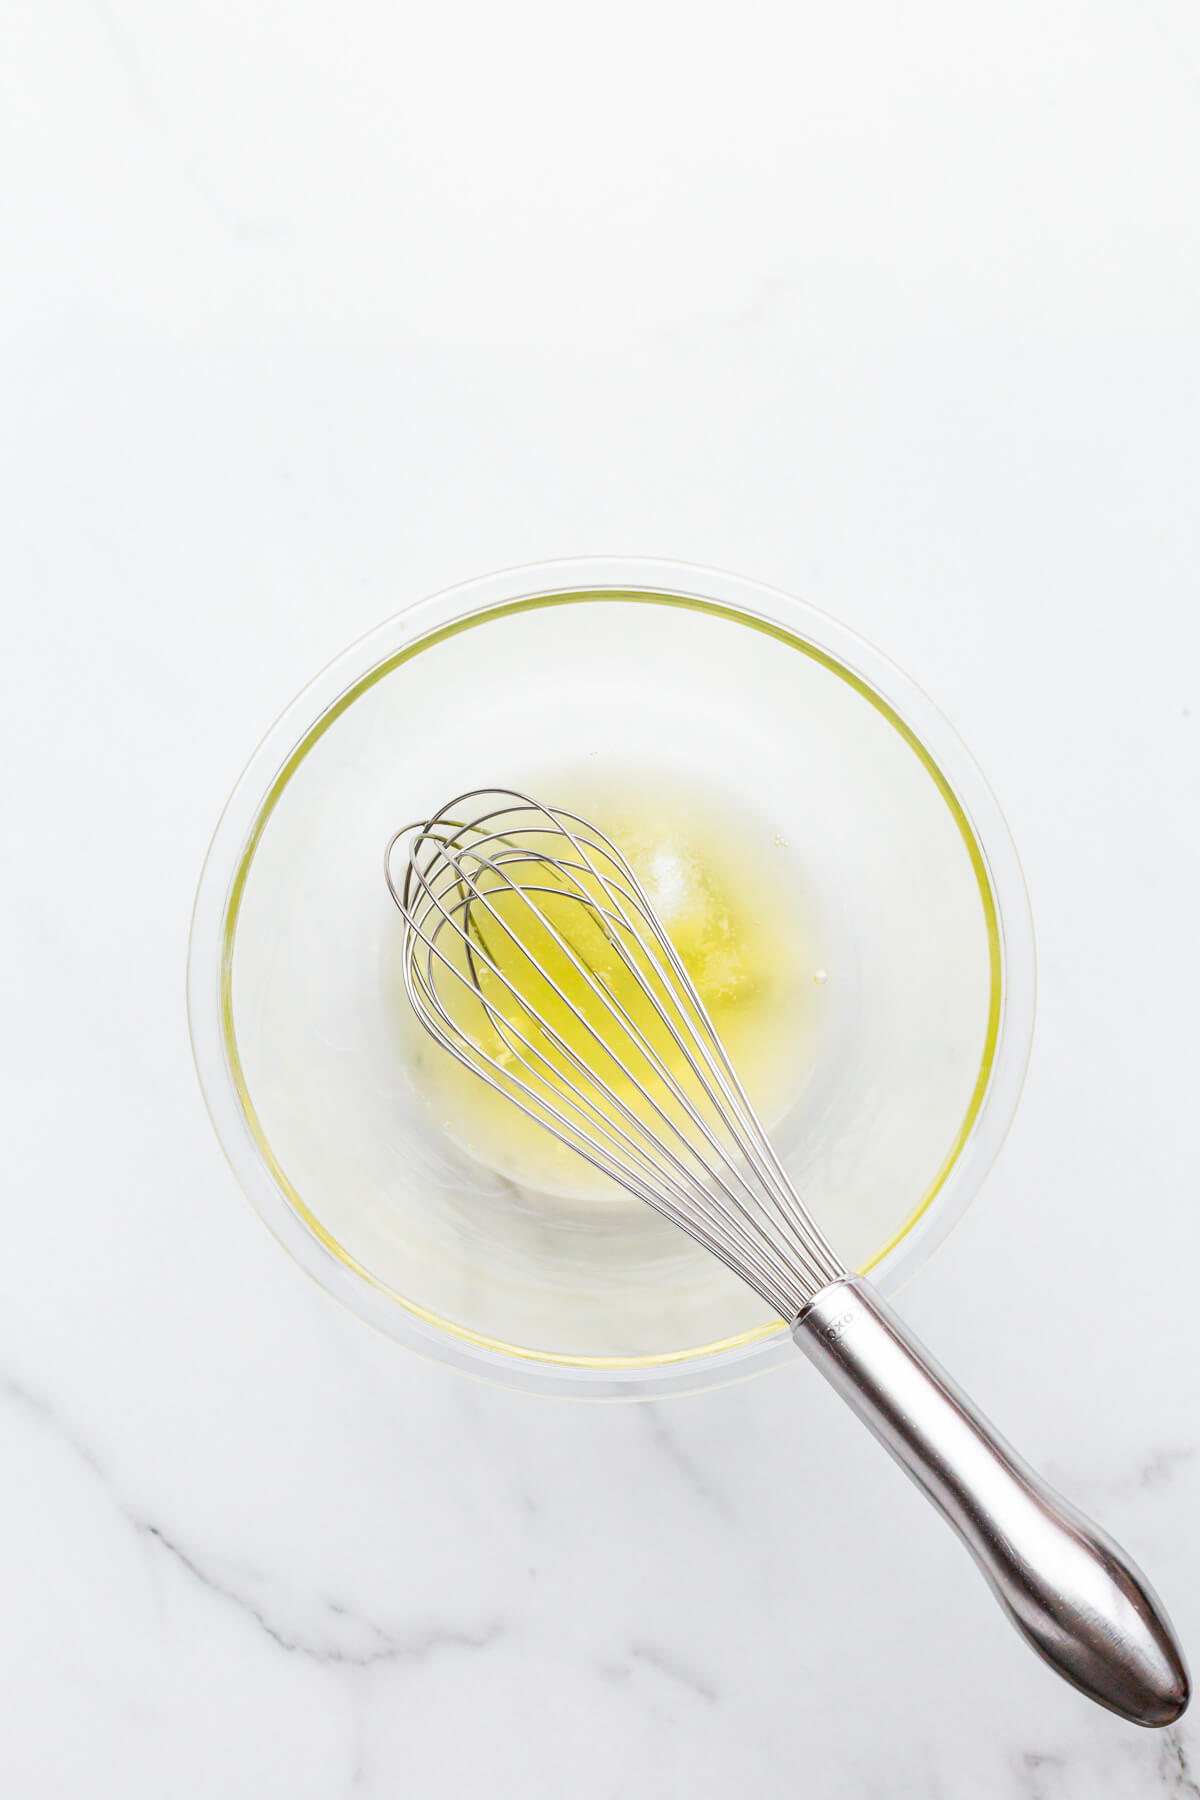 Egg whites in a glass bowl with a whisk that are ready to be whipped to make financiers.